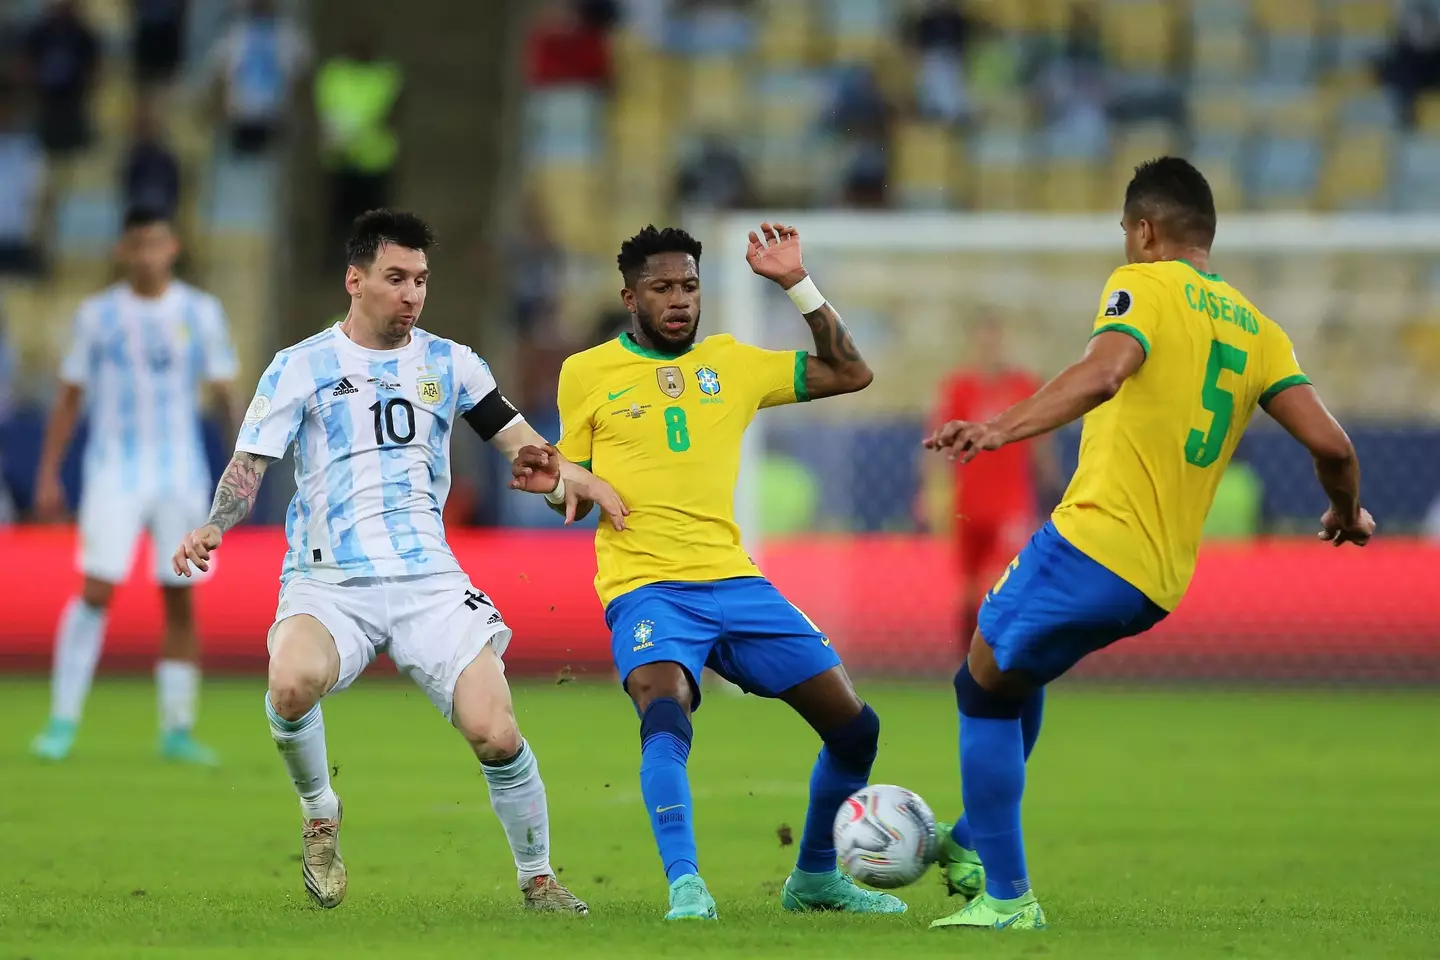 Fred and Casemiro have played together in midfield for Brazil, and are now Manchester United teammates. Image: Alamy